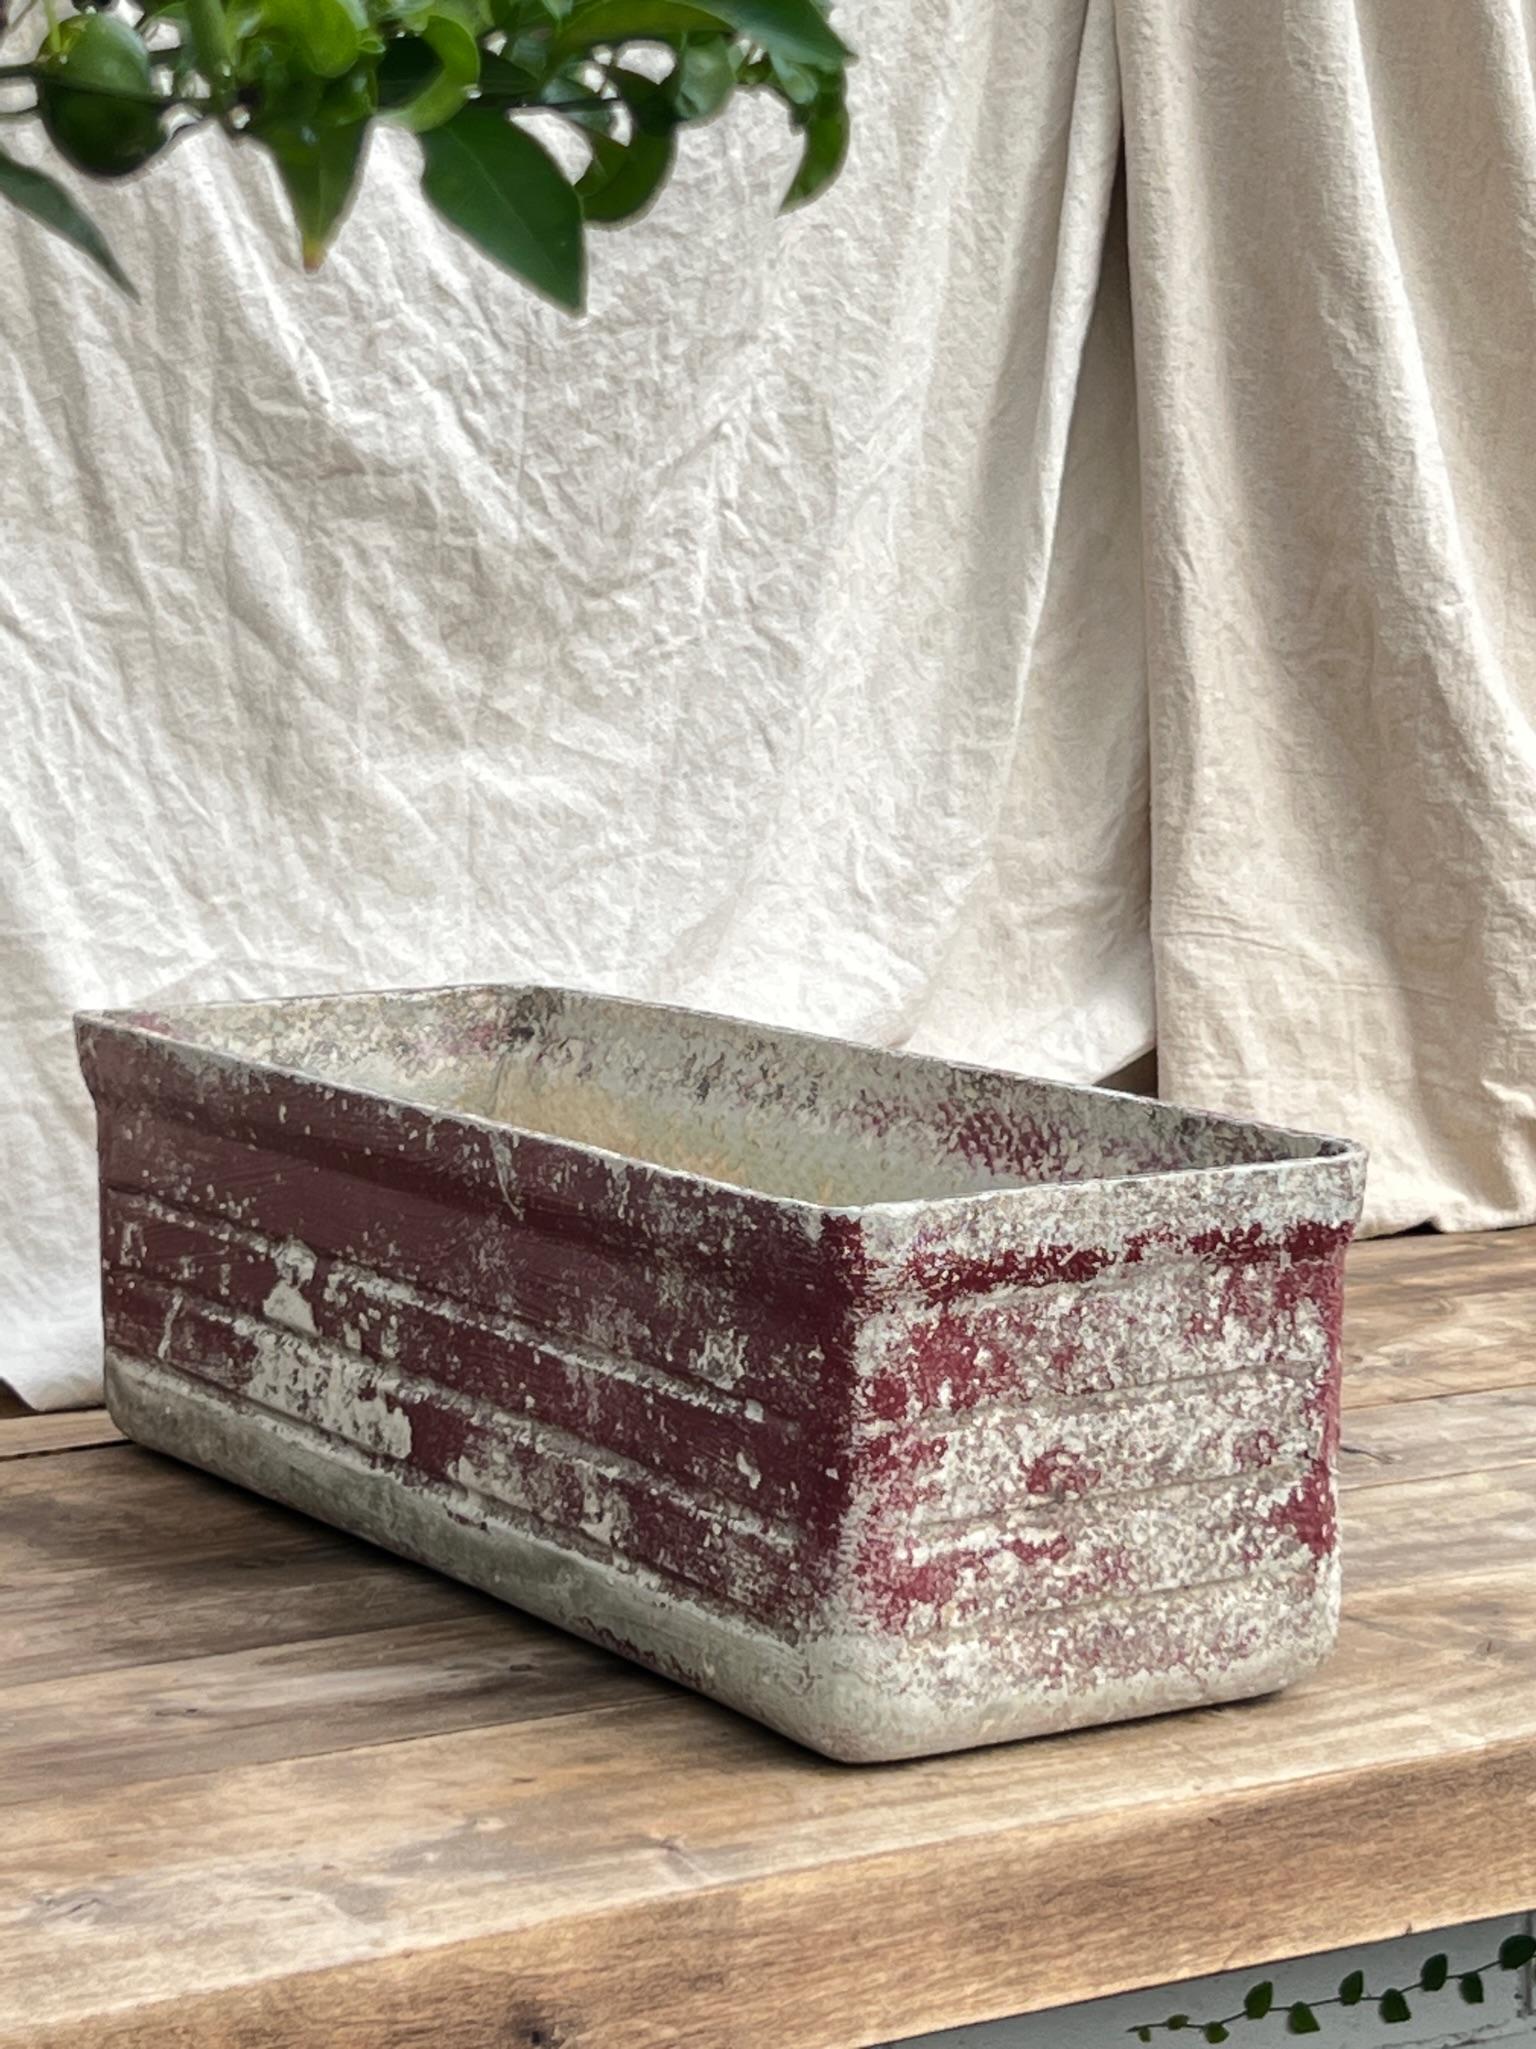 Crafted by willy guhl in switzerland during the 1960s, these rectangular concrete box planters exhibit a rich red hue adorned with a beautifully aged patina.

Measurements: 23.5